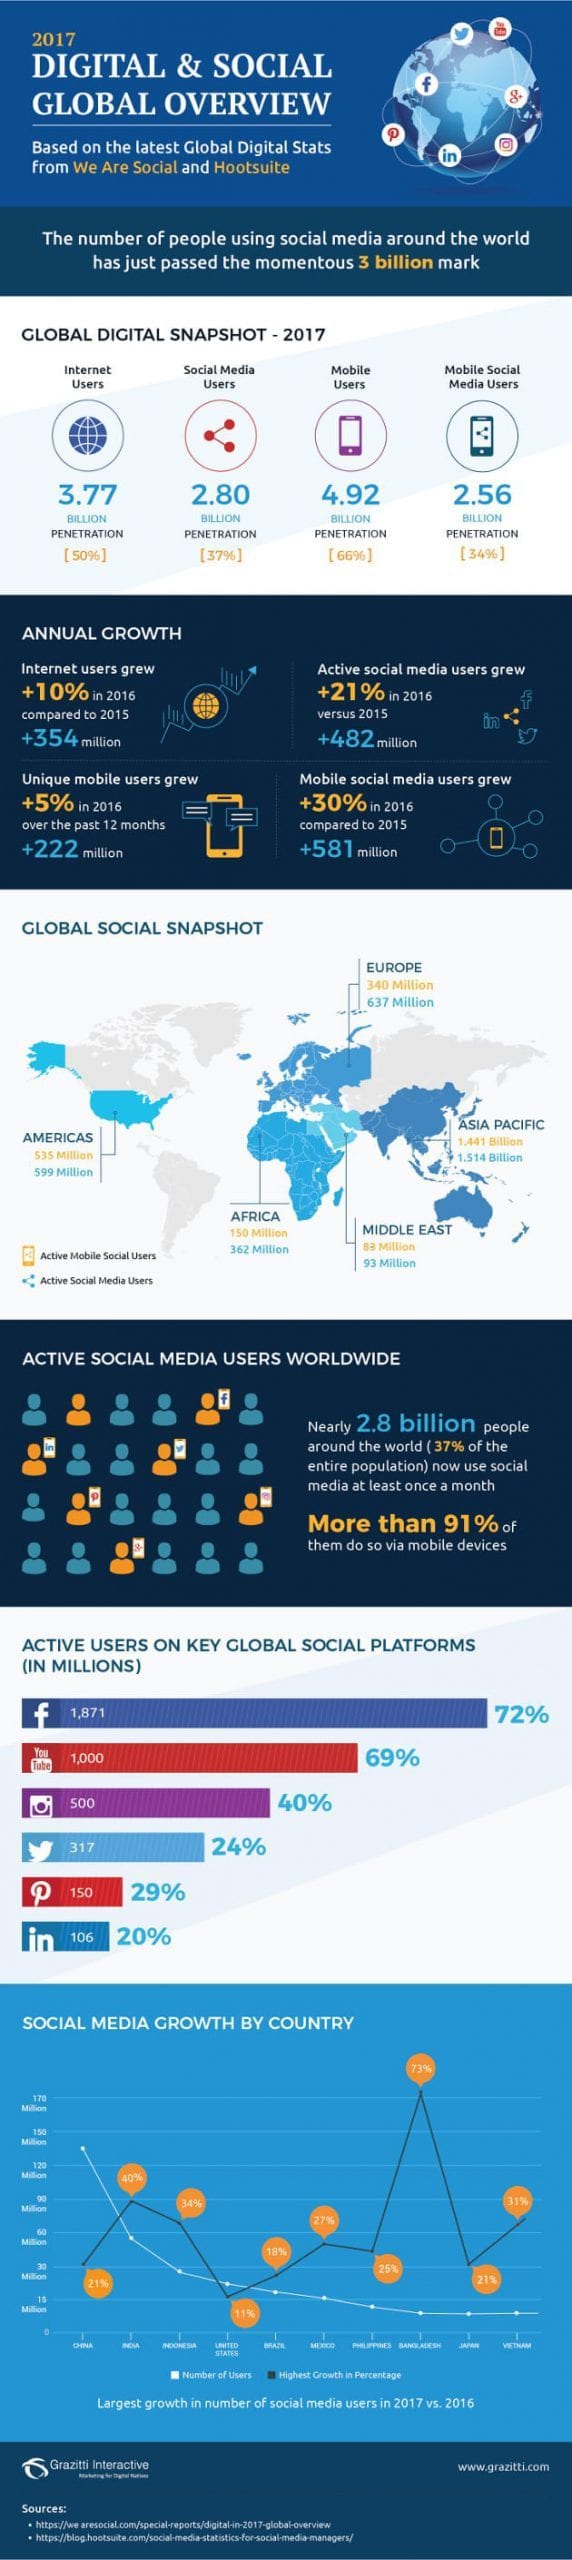 171030-infographic-digital-and-social-in-2017-9329584